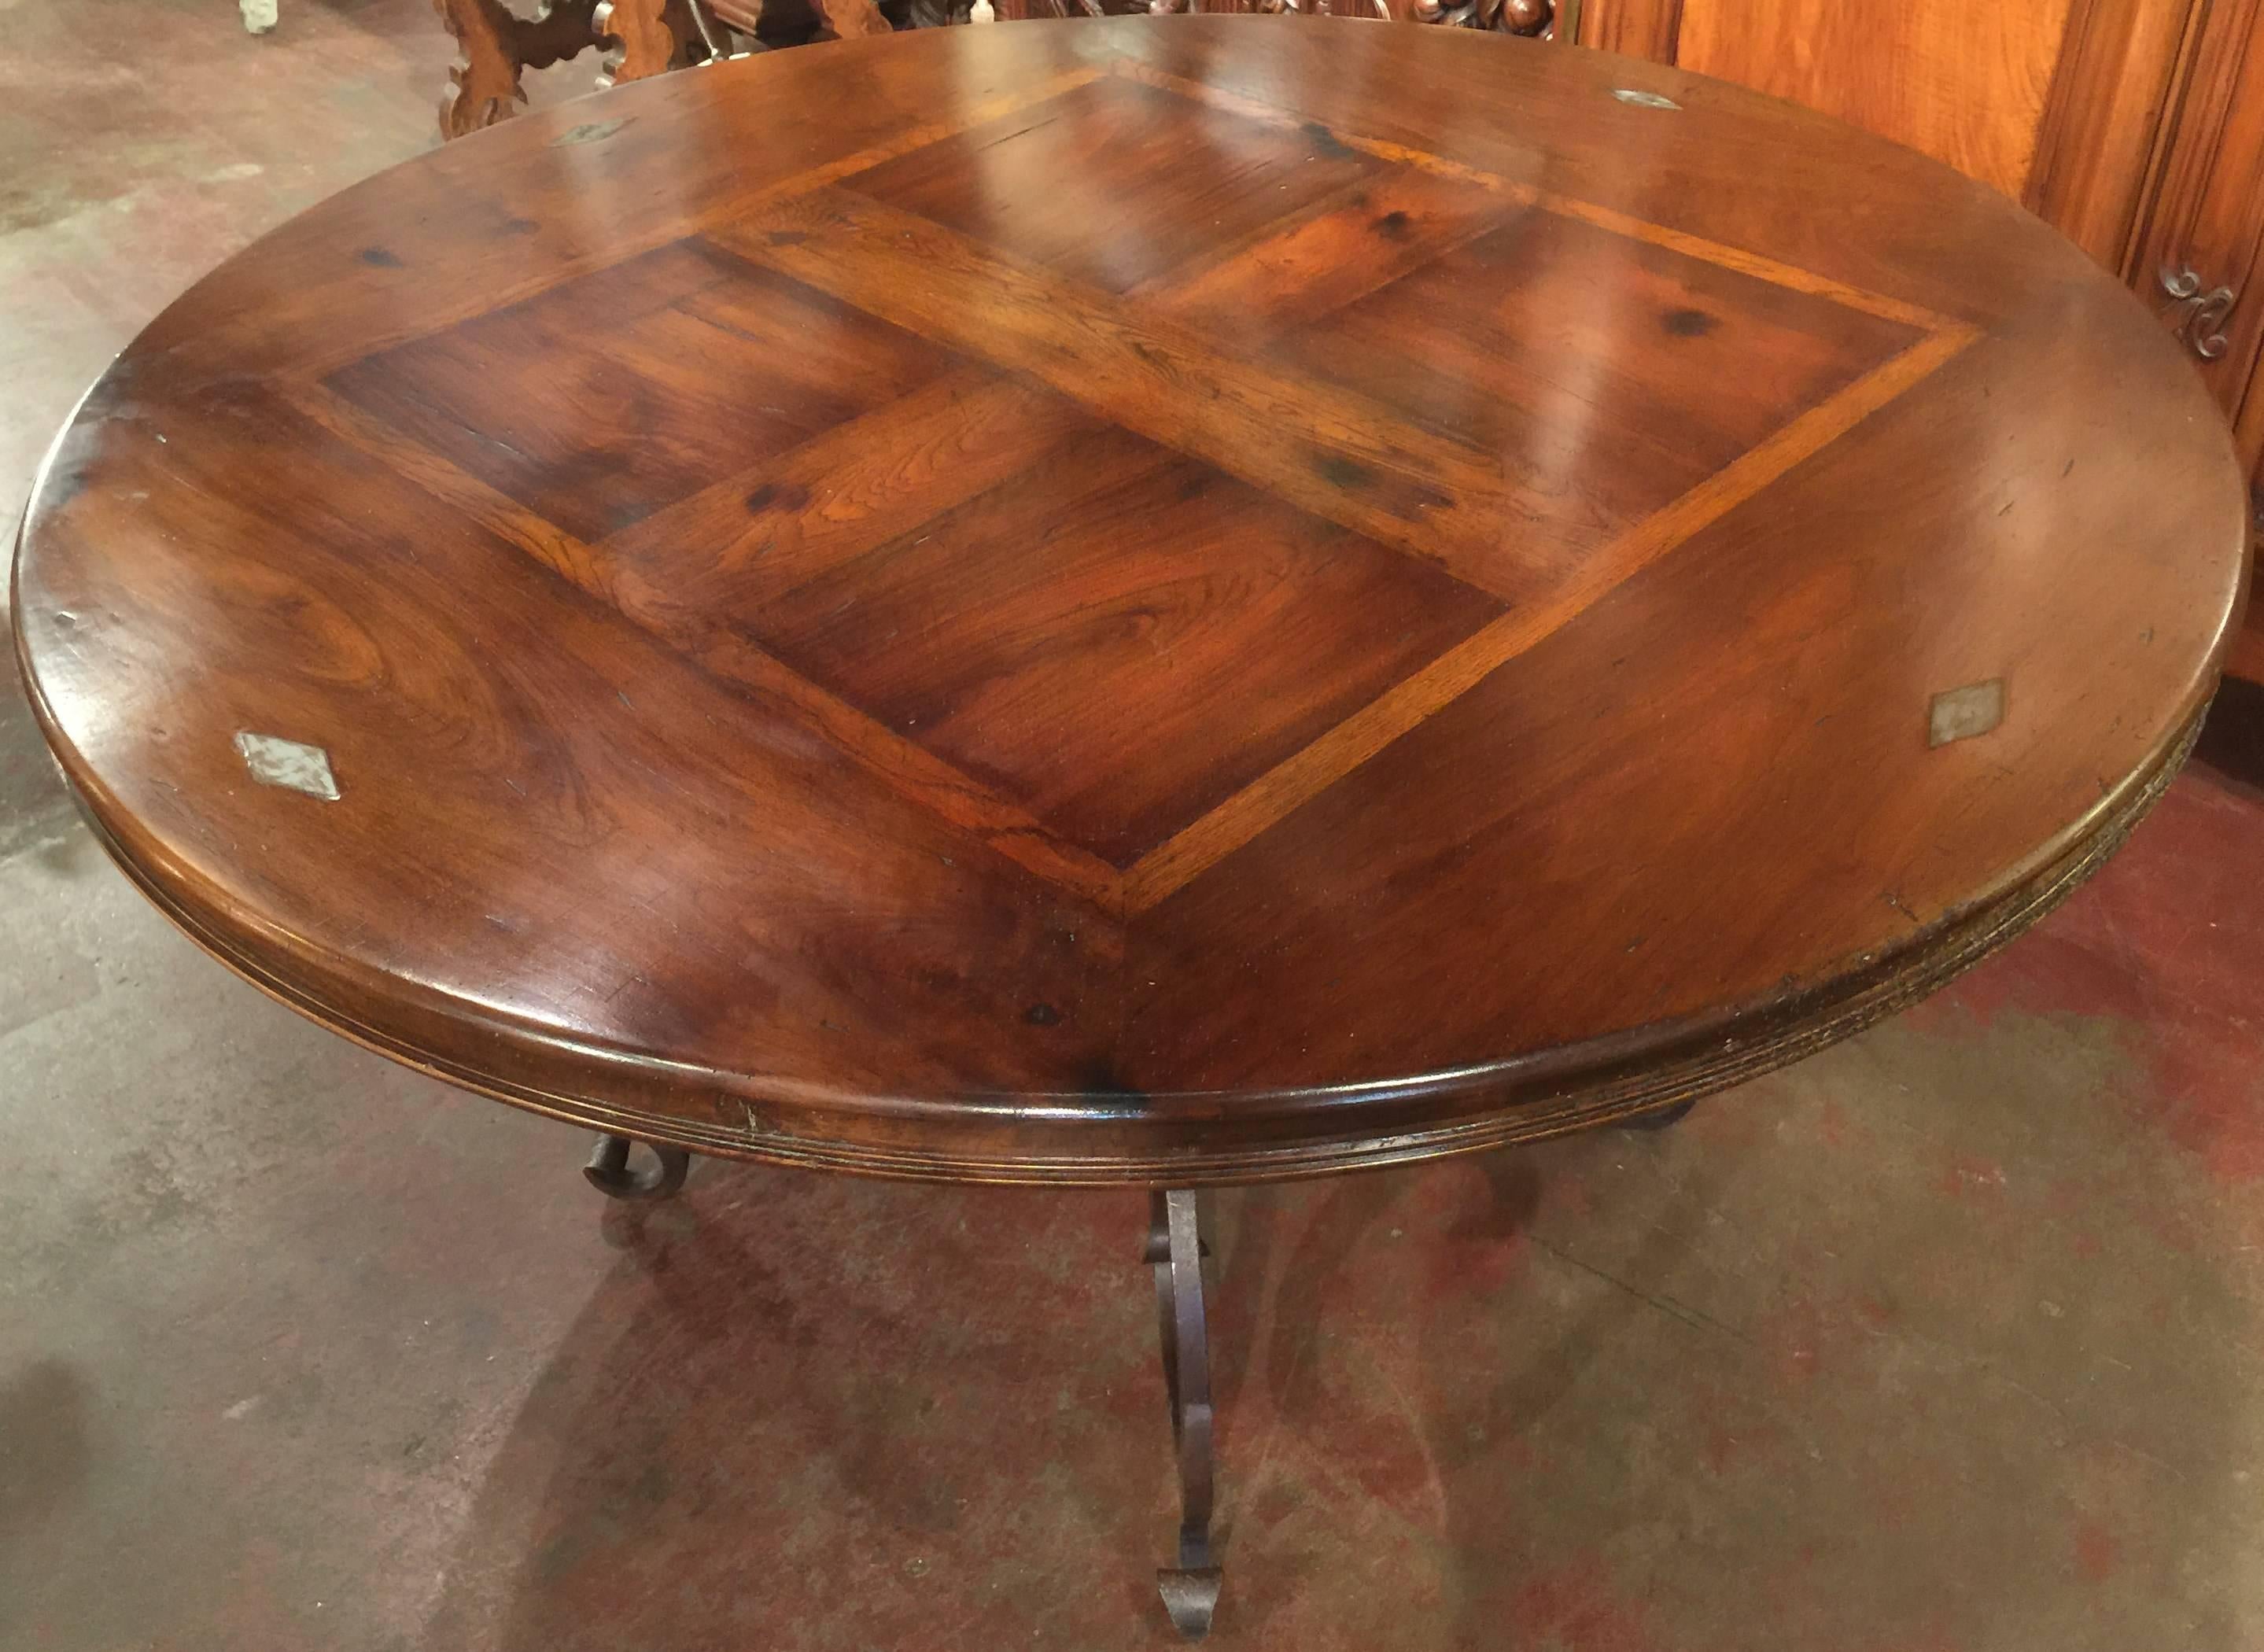 Elegant iron and wood round table from France. The thick walnut top made with antique wood, has a center parquet top and four large diamond shape decorative nails. Thick scrolled hand-forged iron base with a rust finish and some gilt. Excellent